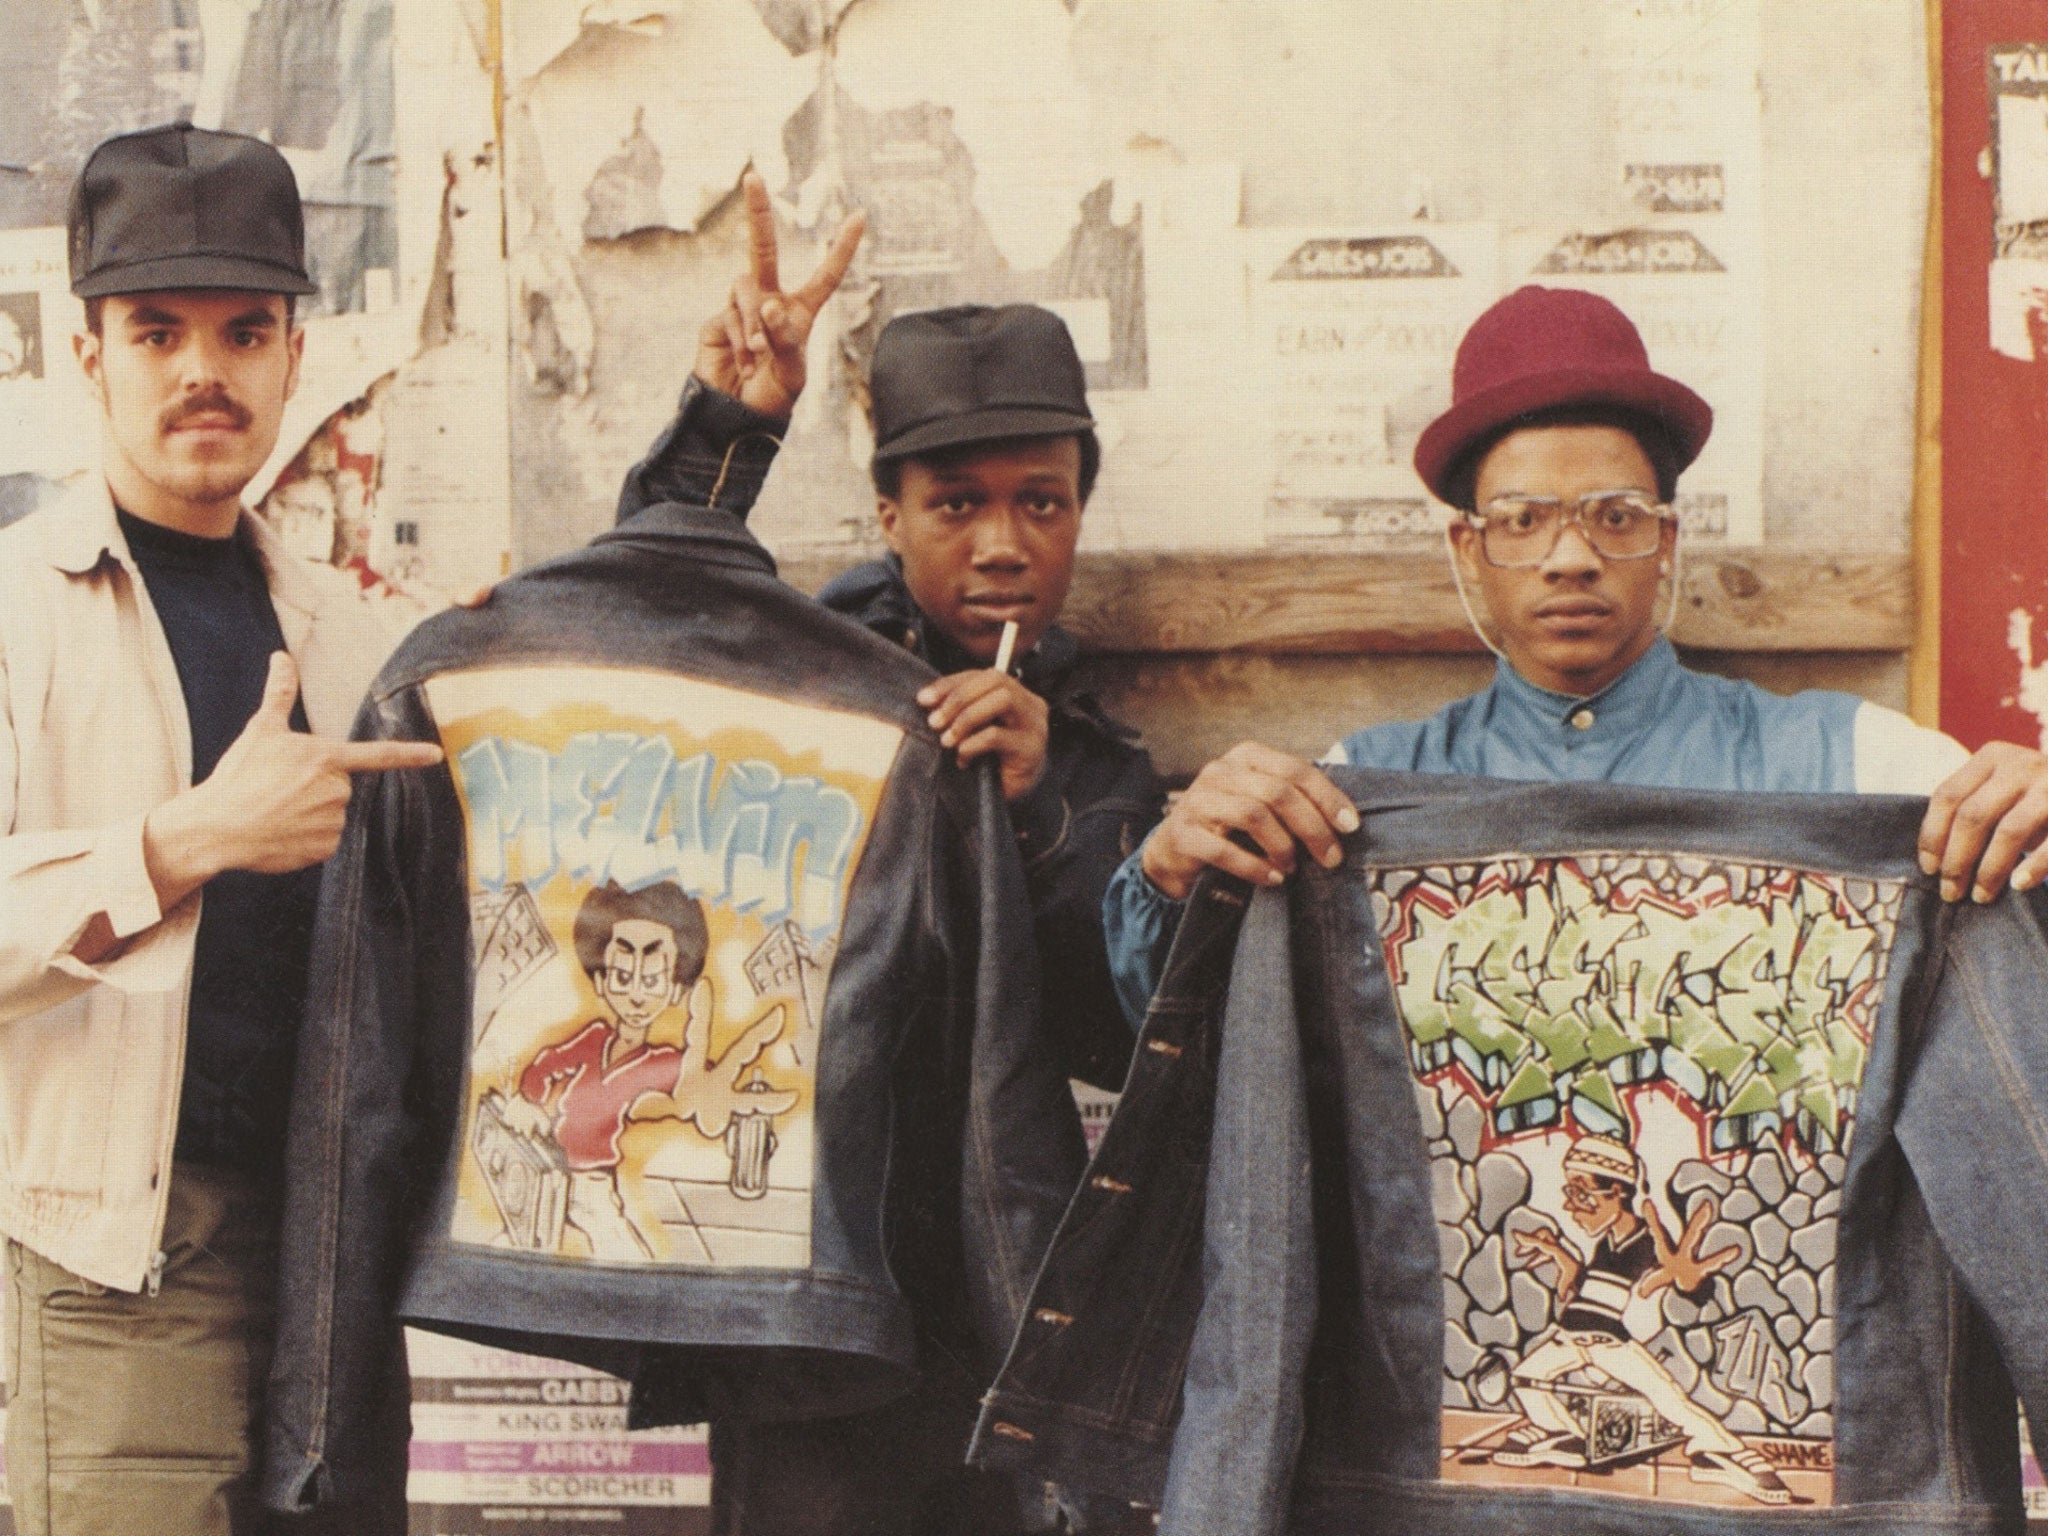 An examination of hip hop and urban fashion in ‘Fresh Dressed’